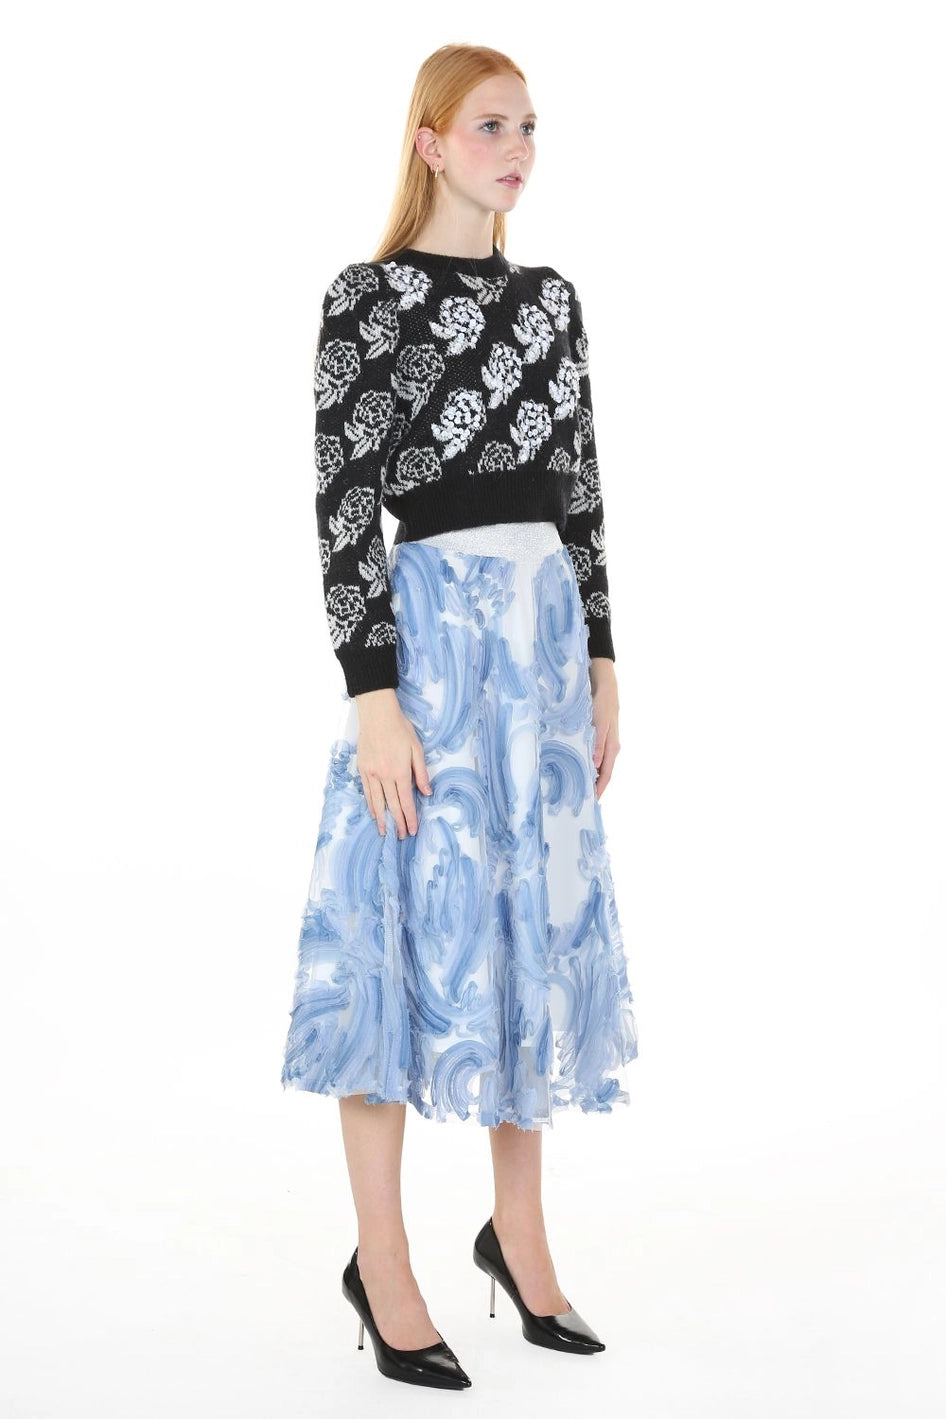 Floral Jacquard Knit with Sequins Top